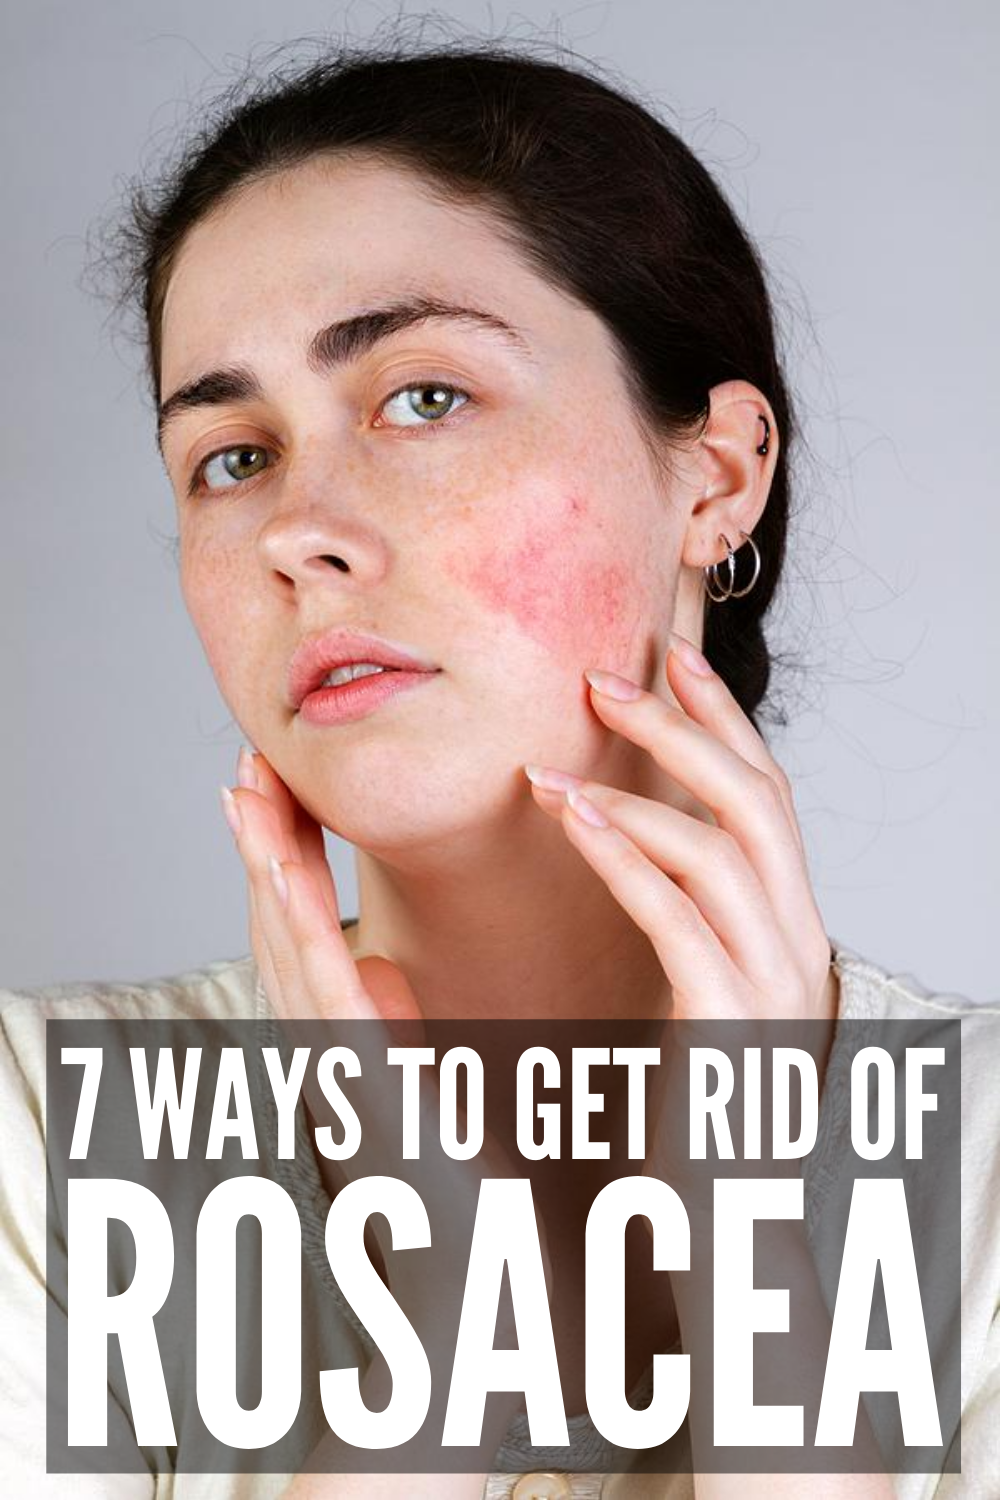 How to Get Rid of Rosacea: 7 Rosacea Remedies That Work